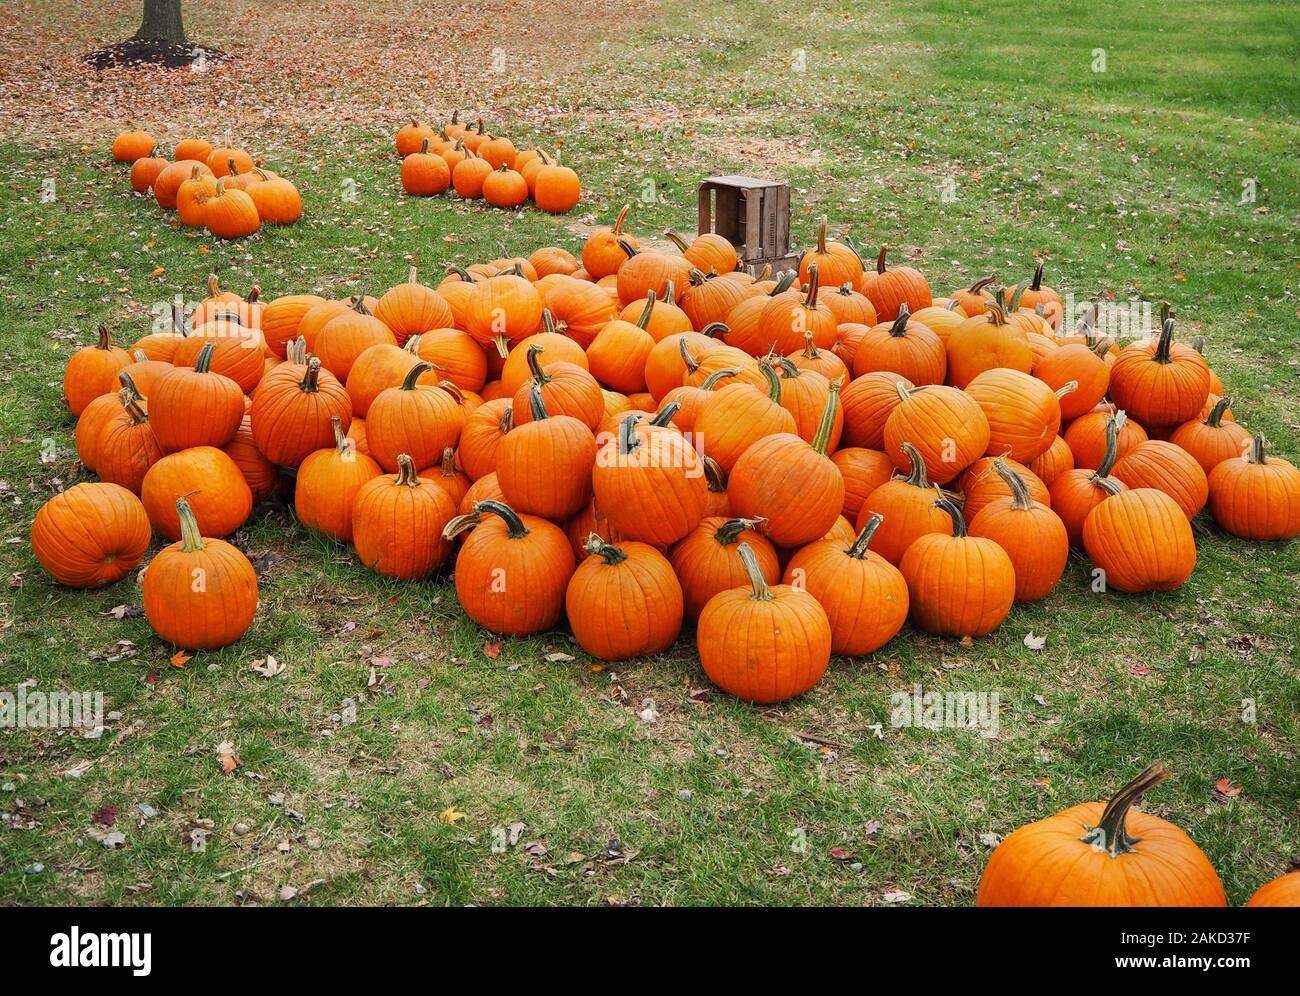 A large, sprawling pile of vibrant orange pumpkins on a grassy lawn with fallen autumn leaves and an old wooden produce crate. Stock Photo